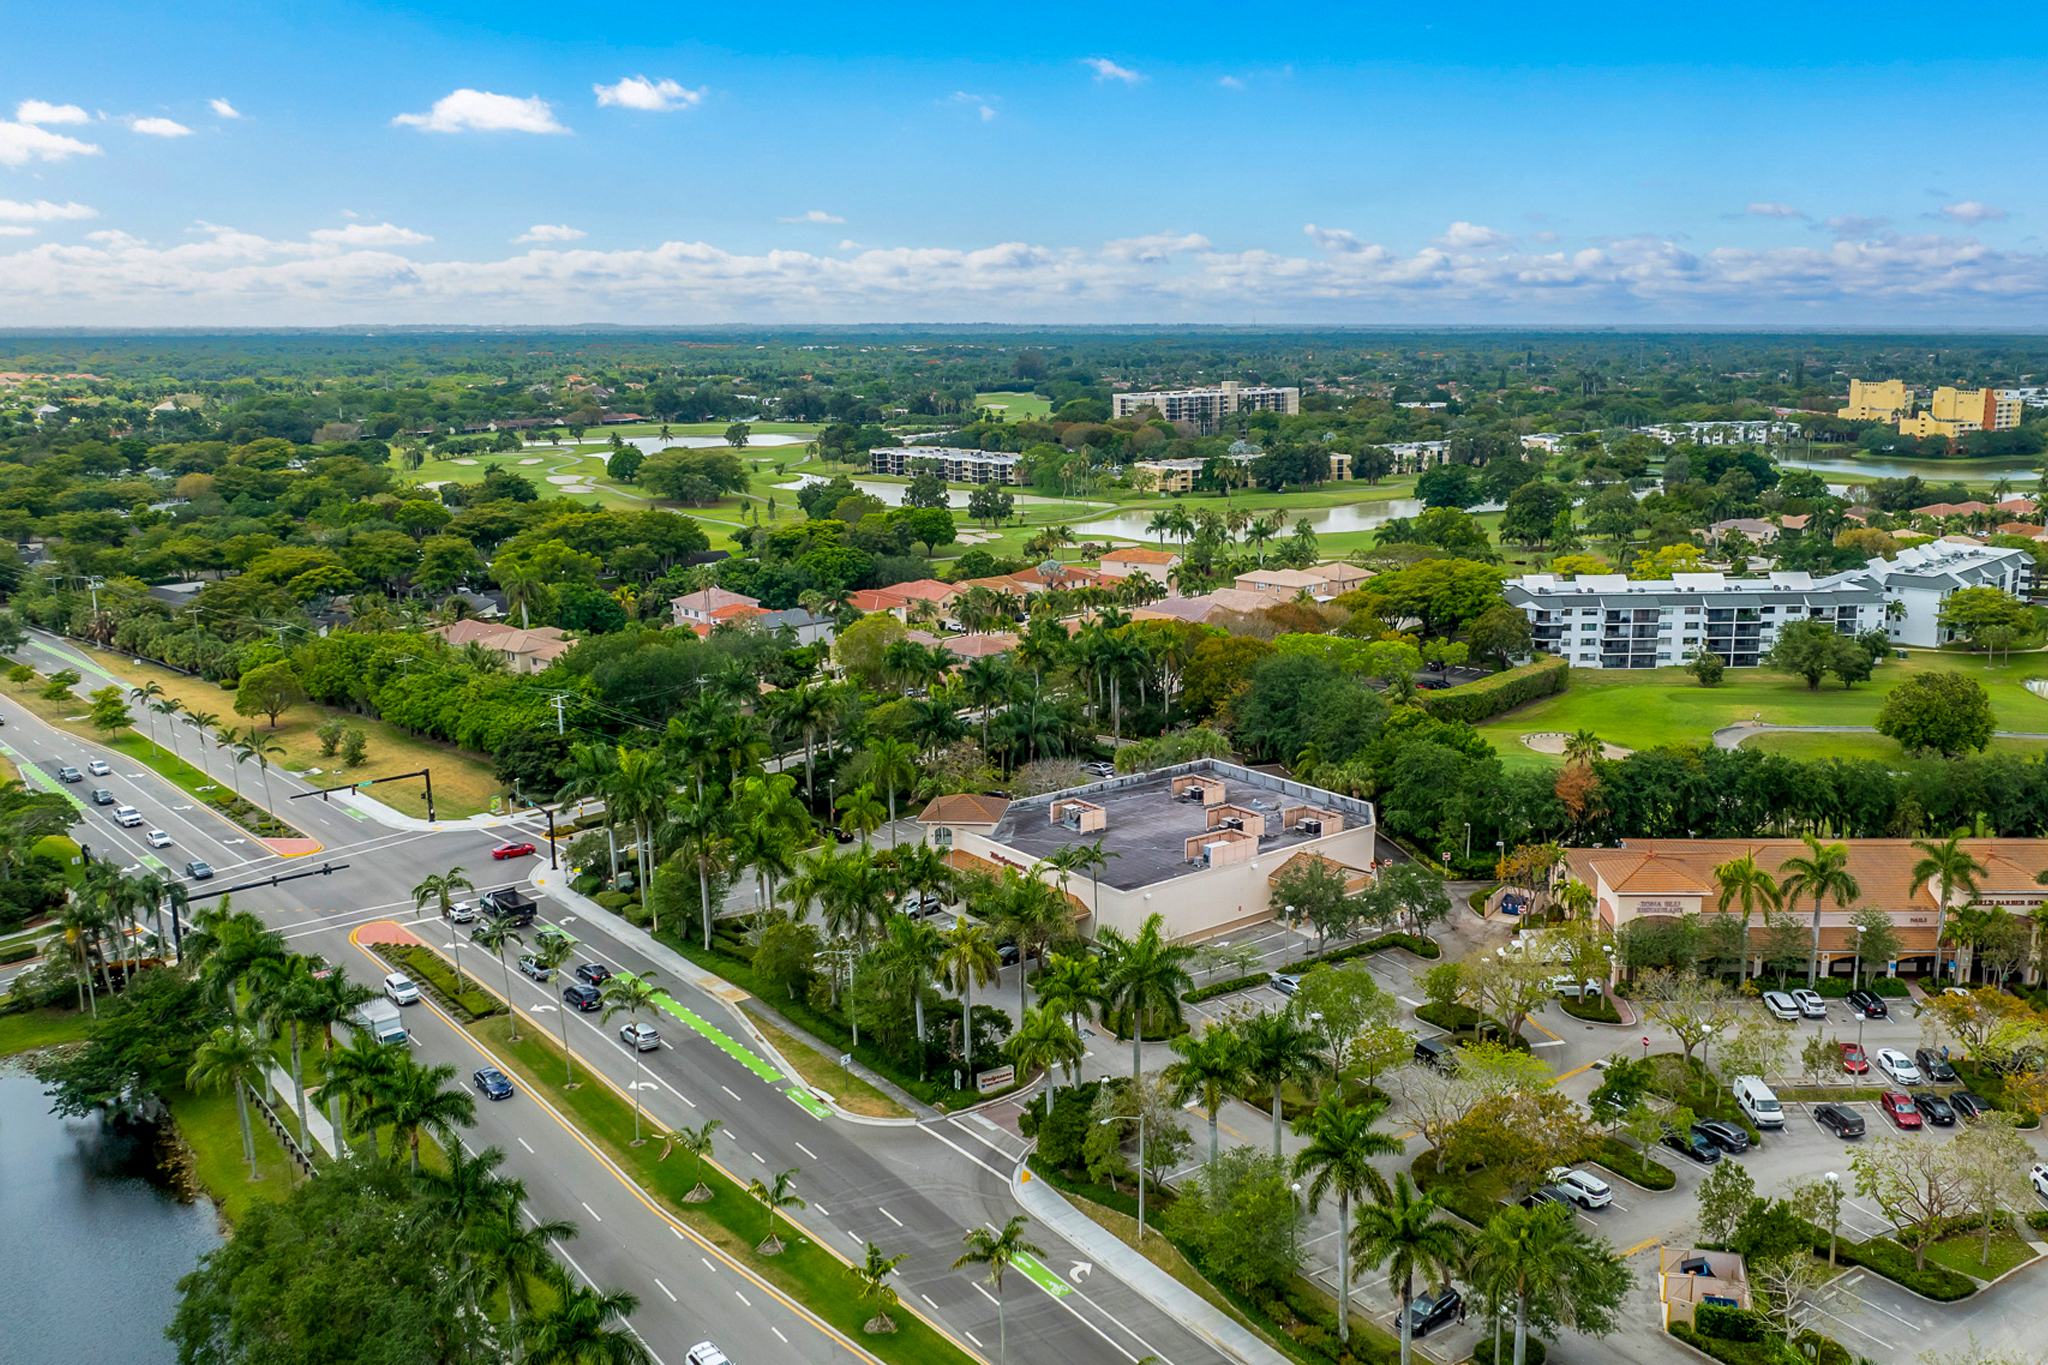 Aerial view of weston along highway with lush tropical greenery